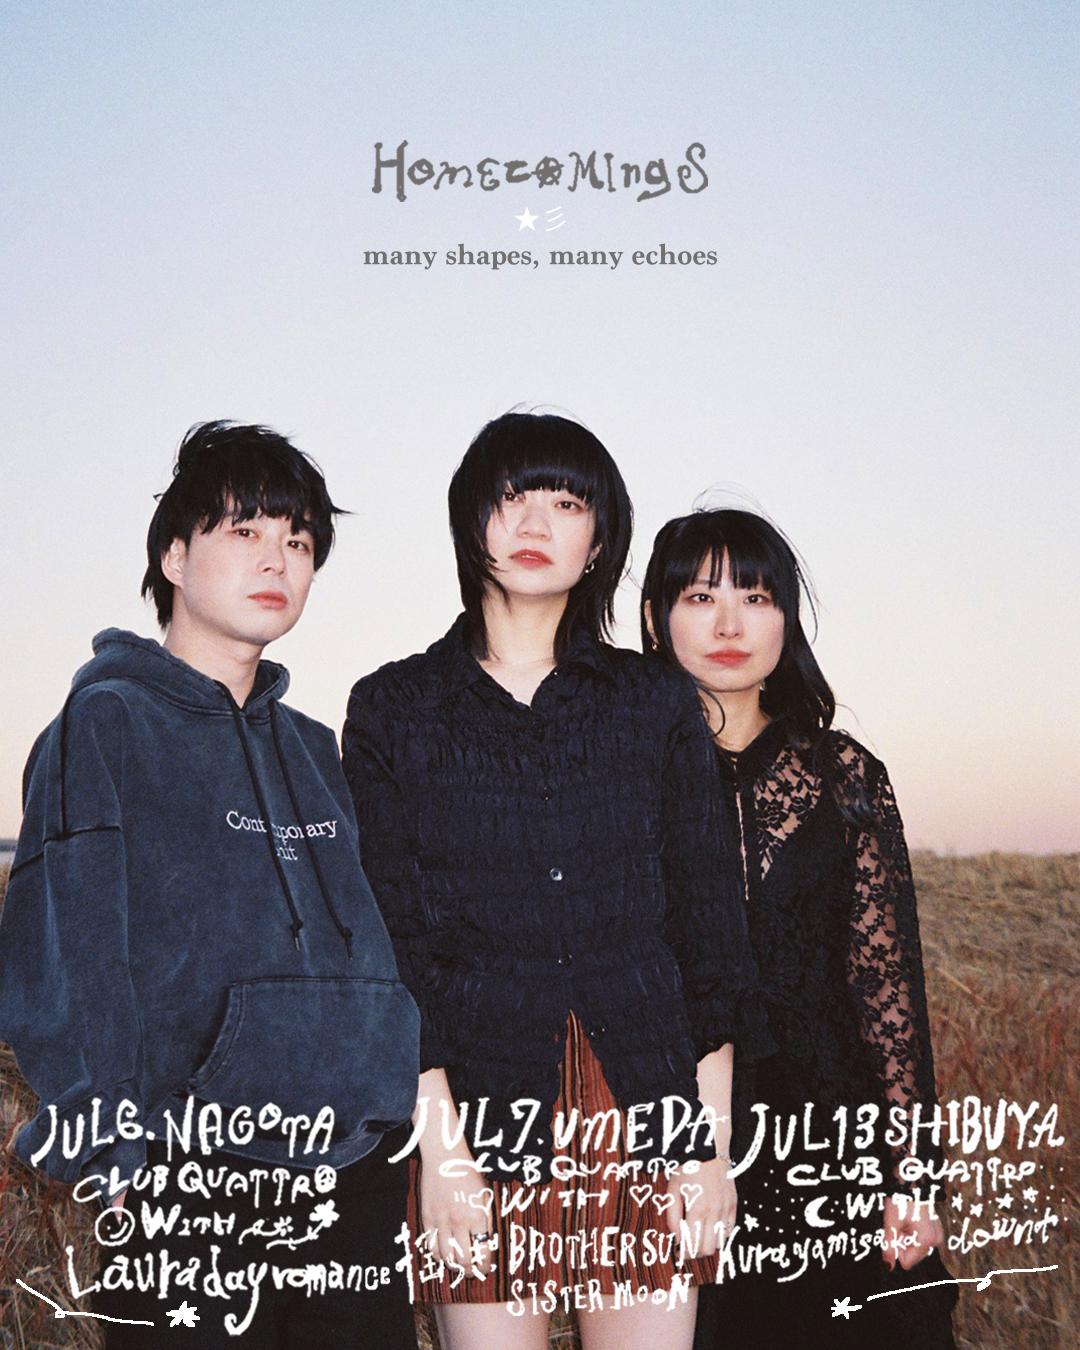 Homecomings presents 「many shapes, many echoes」名古屋公演に出演決定！